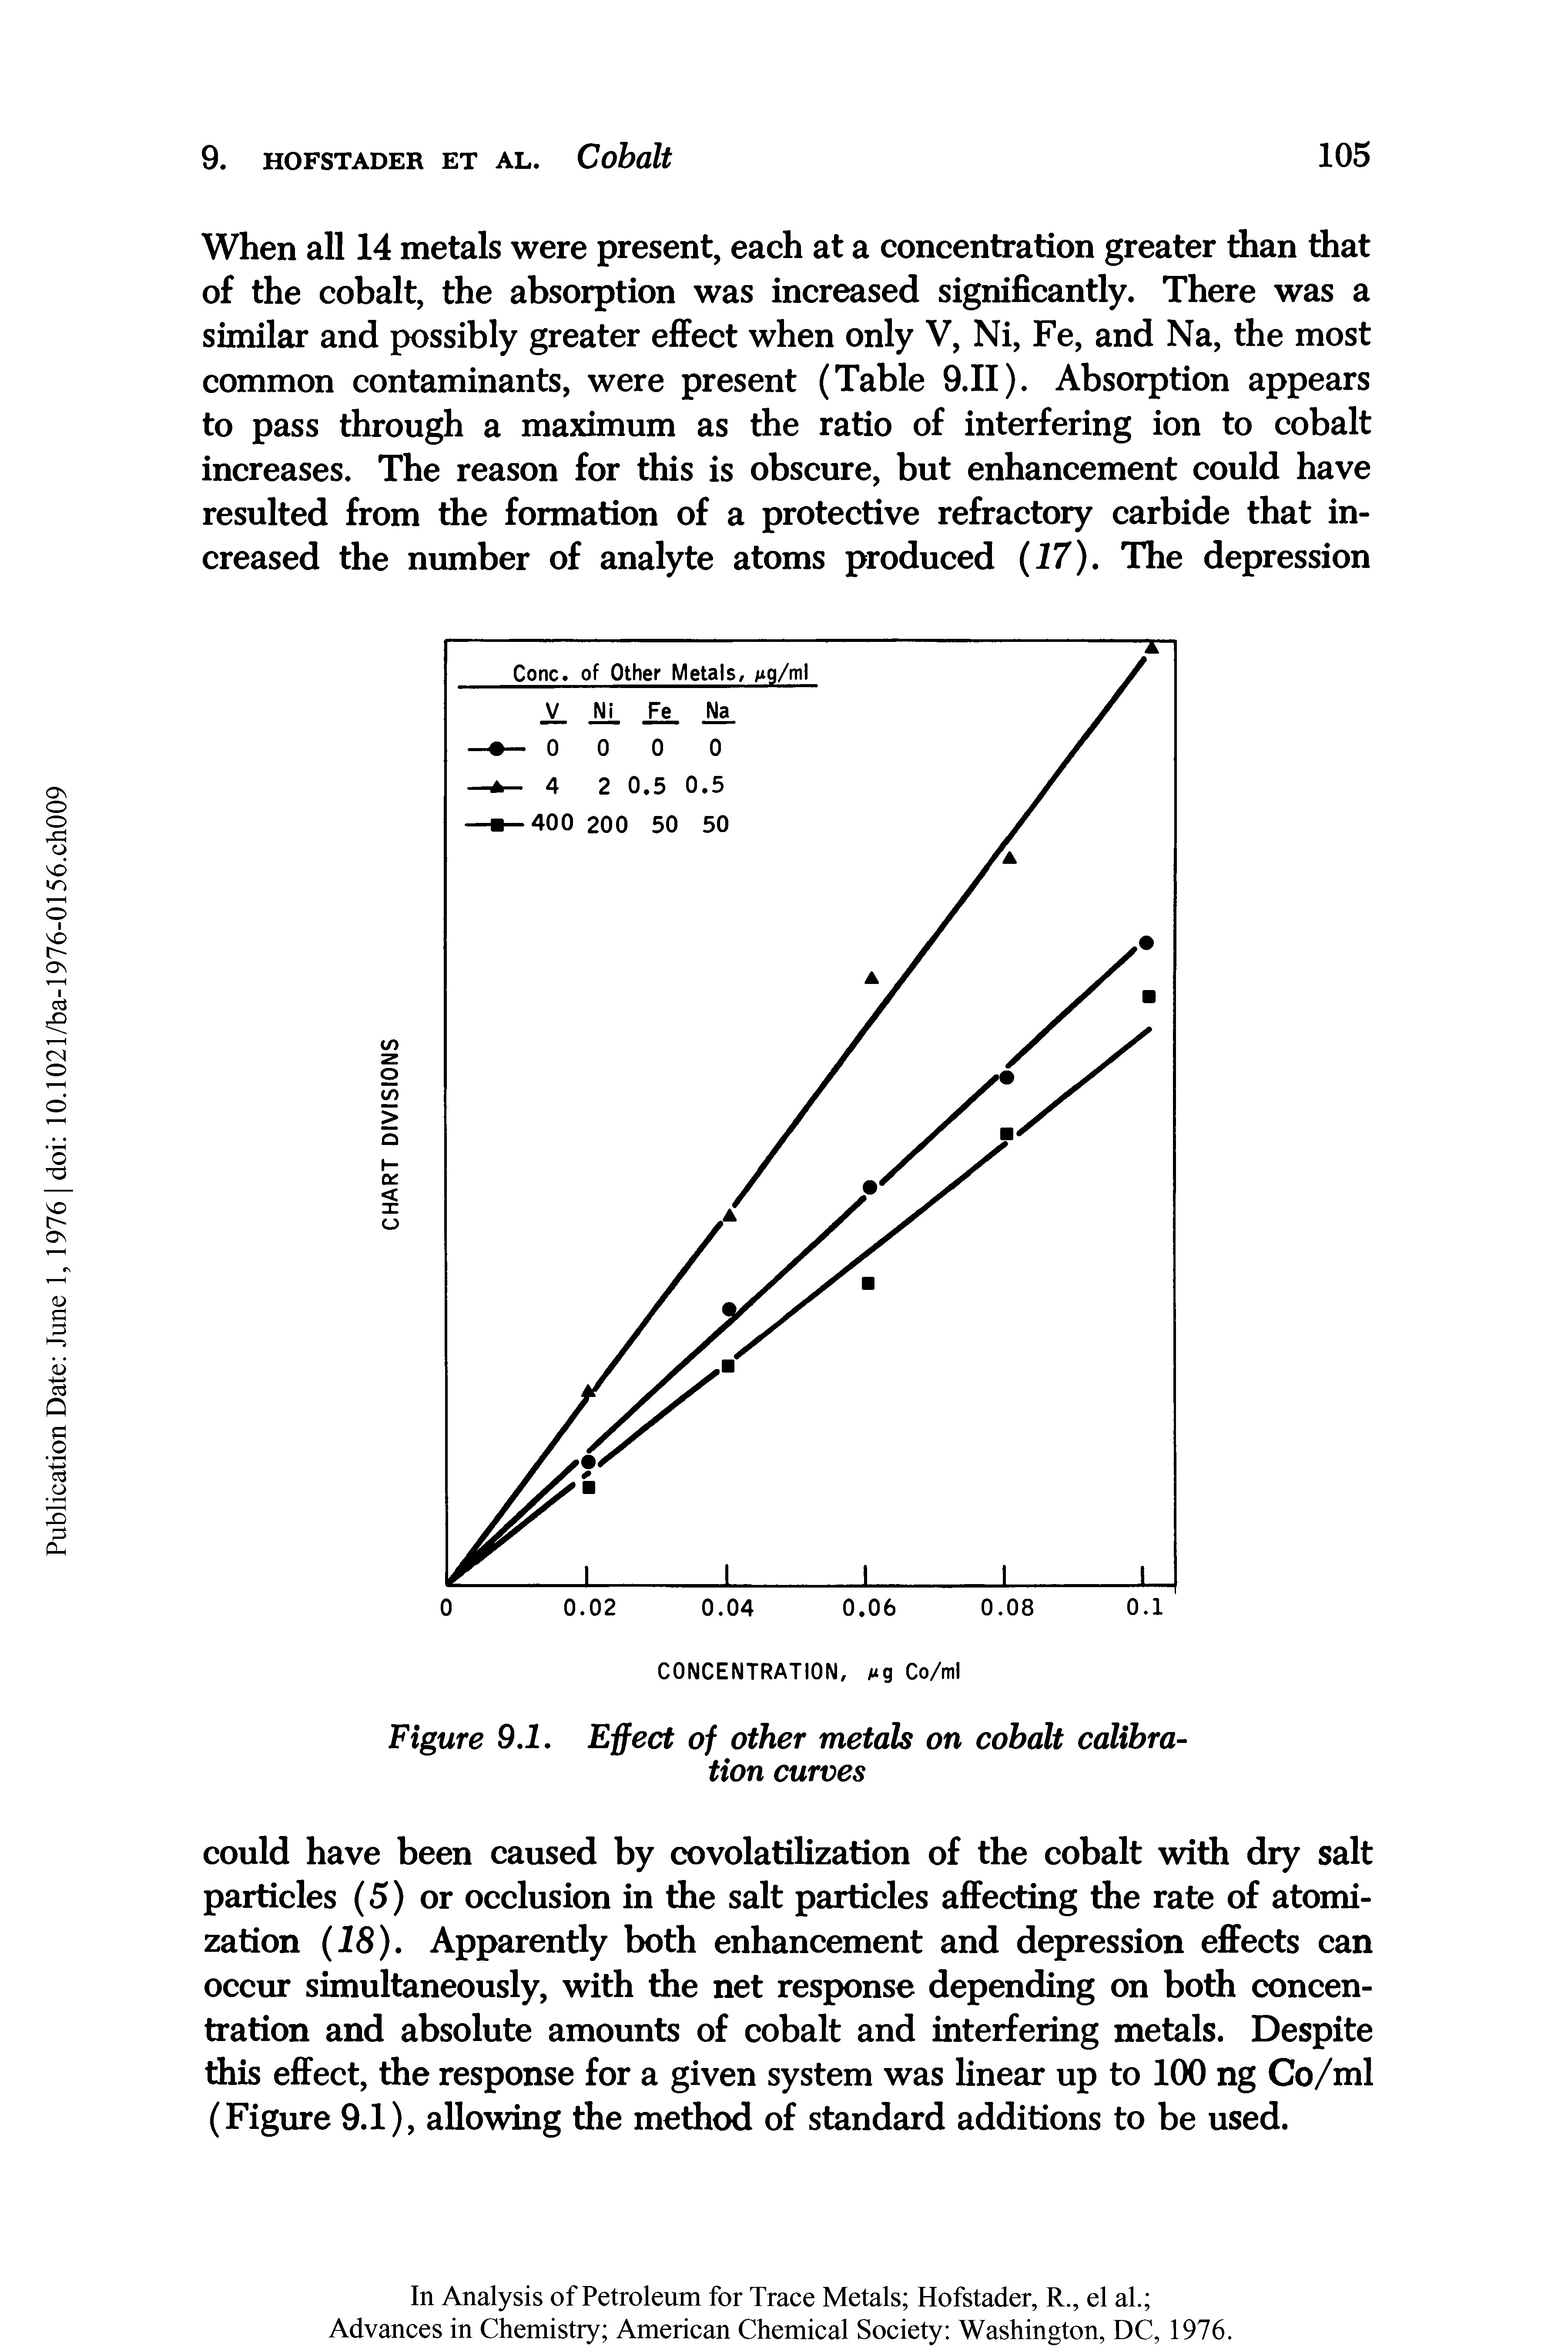 Figure 9.1. Effect of other metals on cobalt calibration curves...